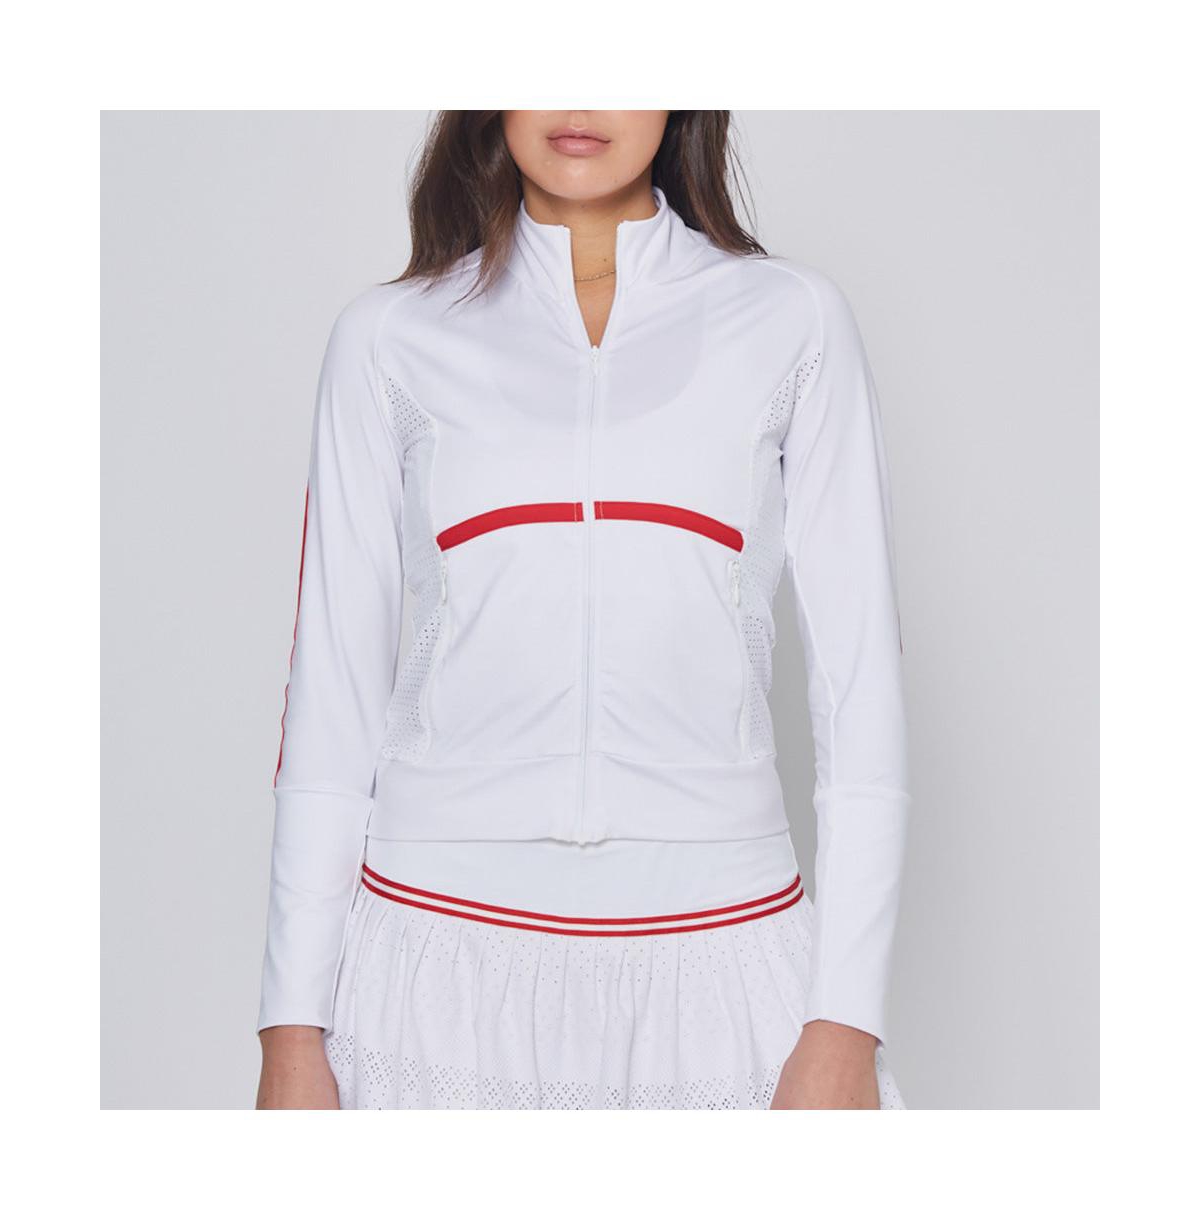 Women's Performance Full-Zip Jacket - White with red trim